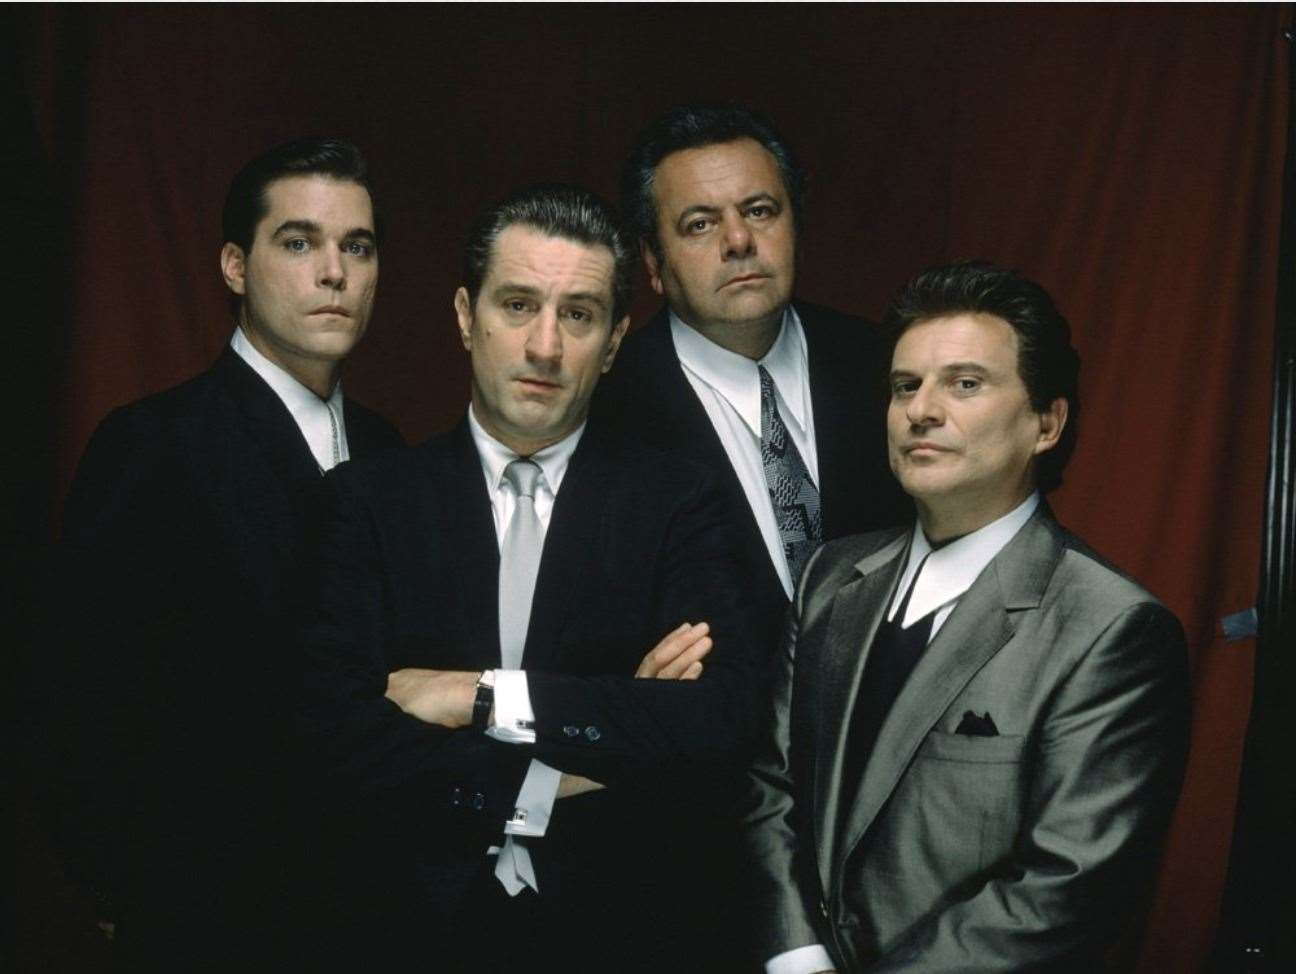 Goodfellas - the Hollywood movie in which Michael Franzese is portrayed by actor Joseph Bono